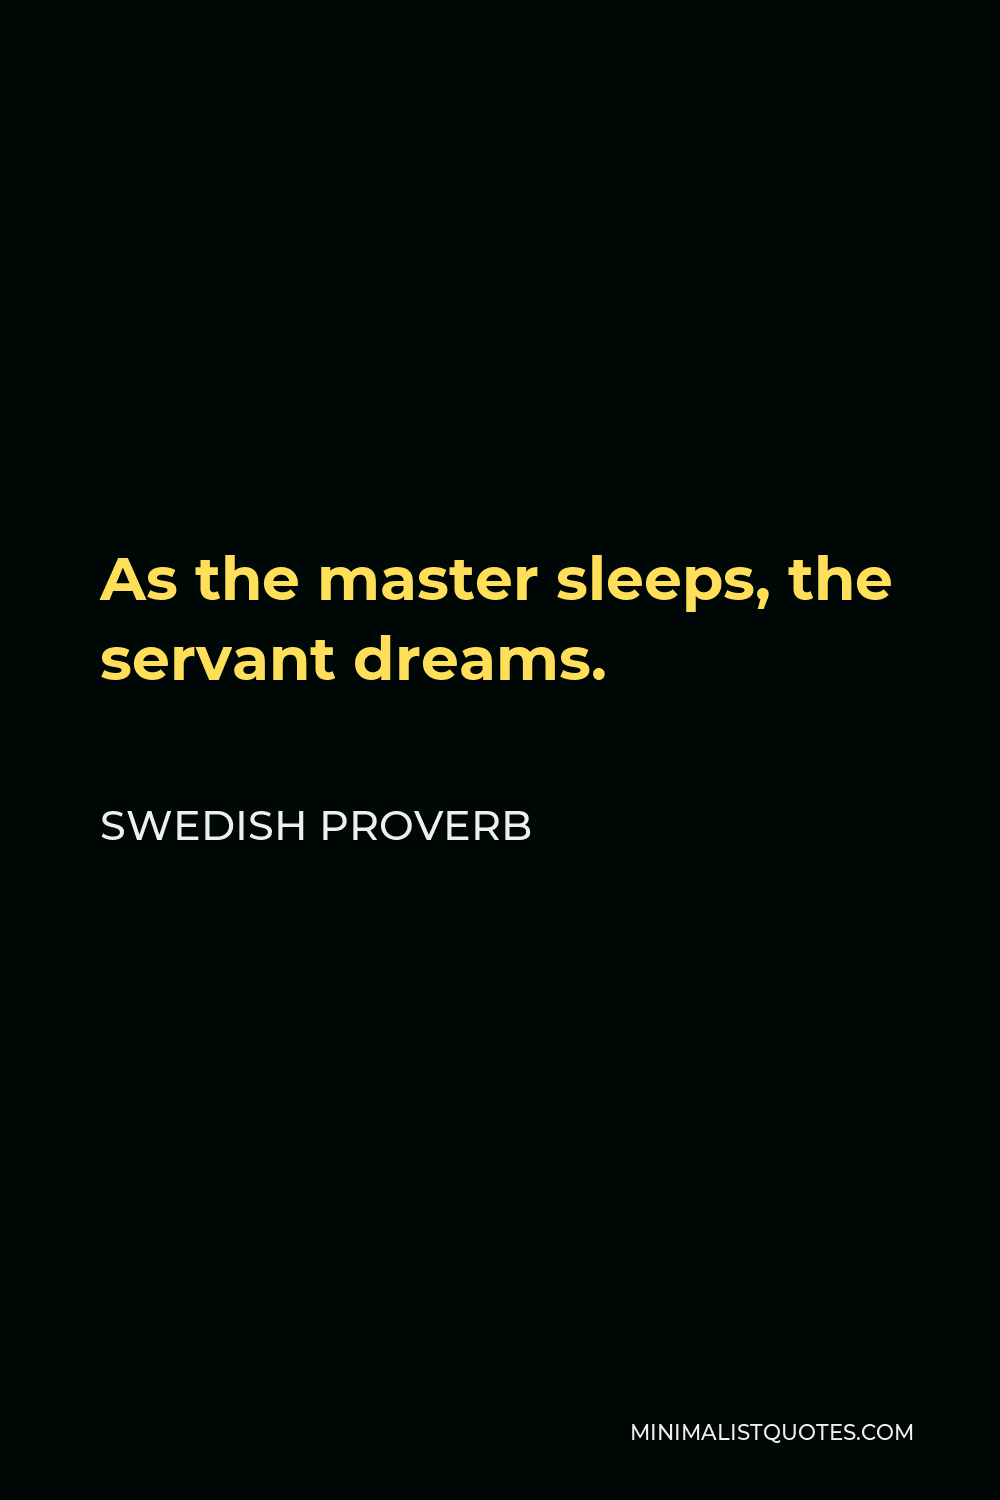 Swedish Proverb Quote - As the master sleeps, the servant dreams.